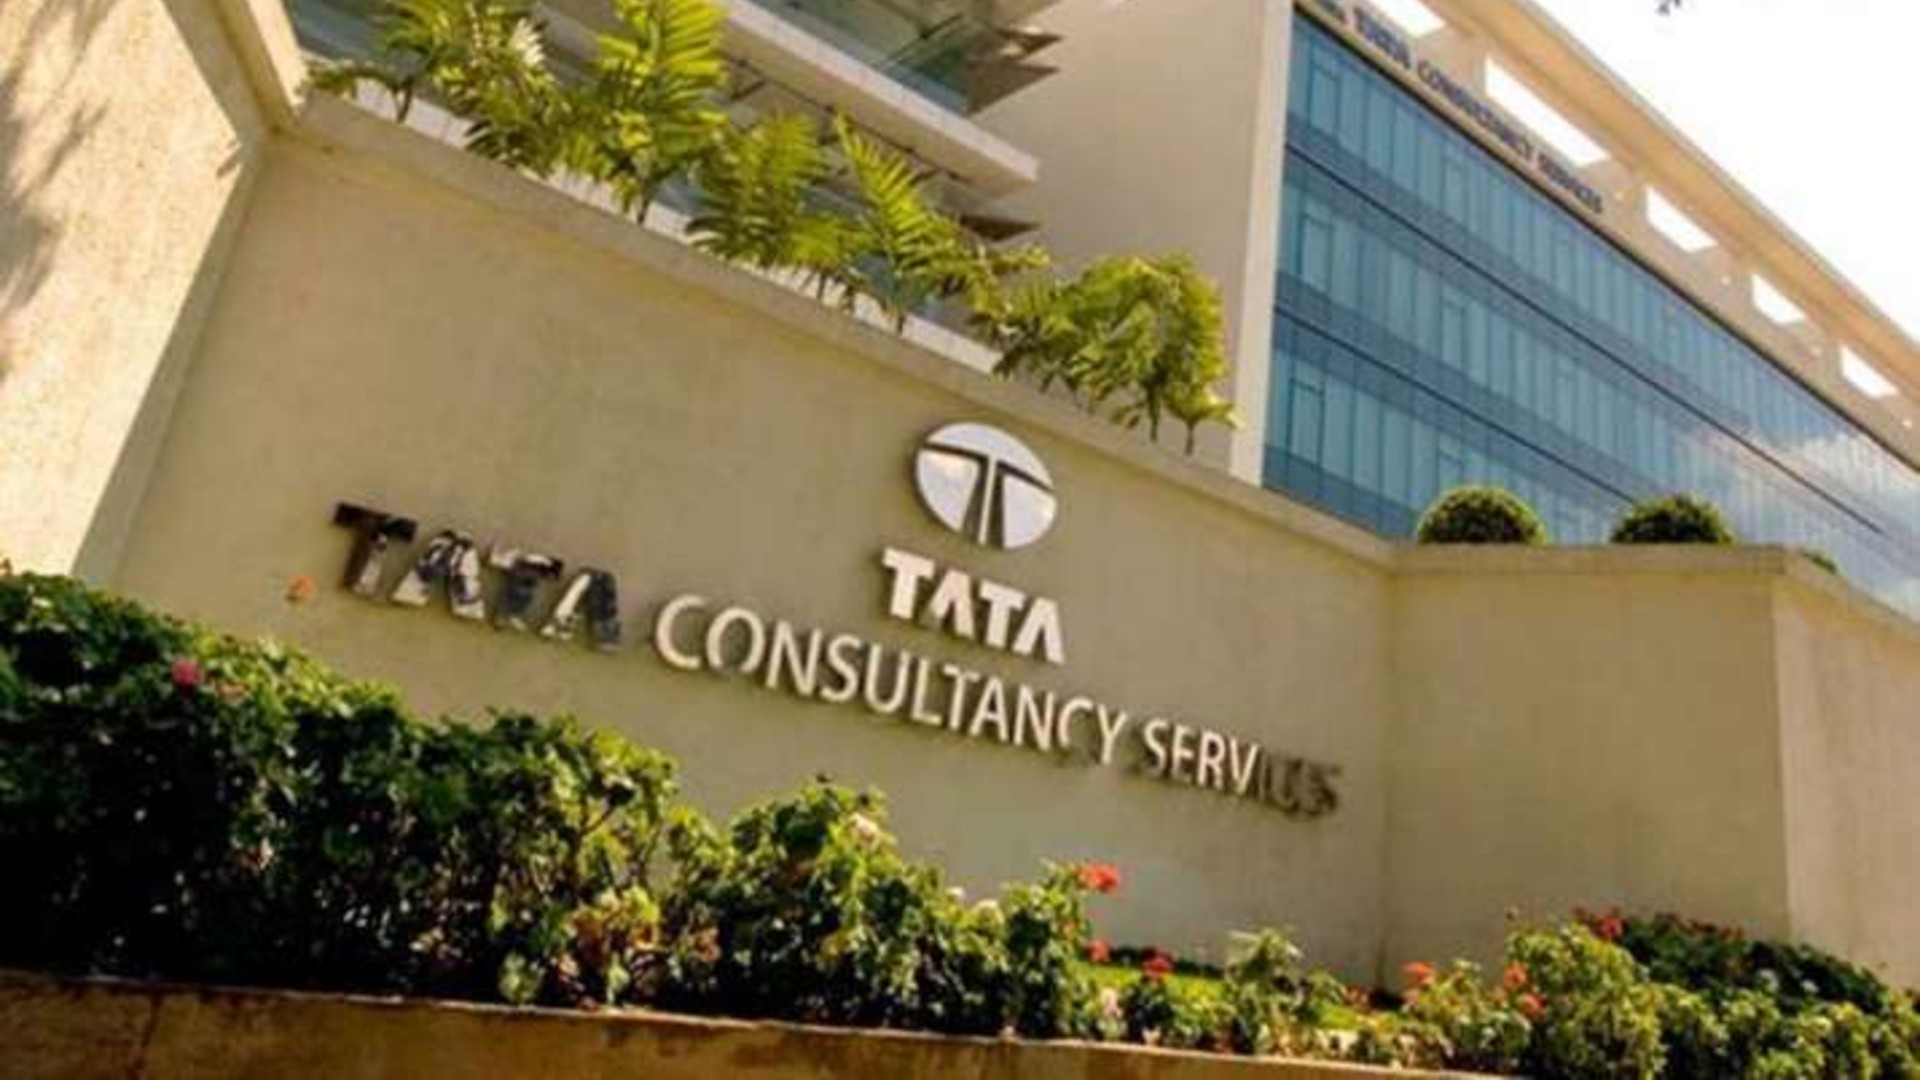 TCS, IBM, Infosys, SAP Impose 100% Work From Home For All Employees; Issues Guidelines